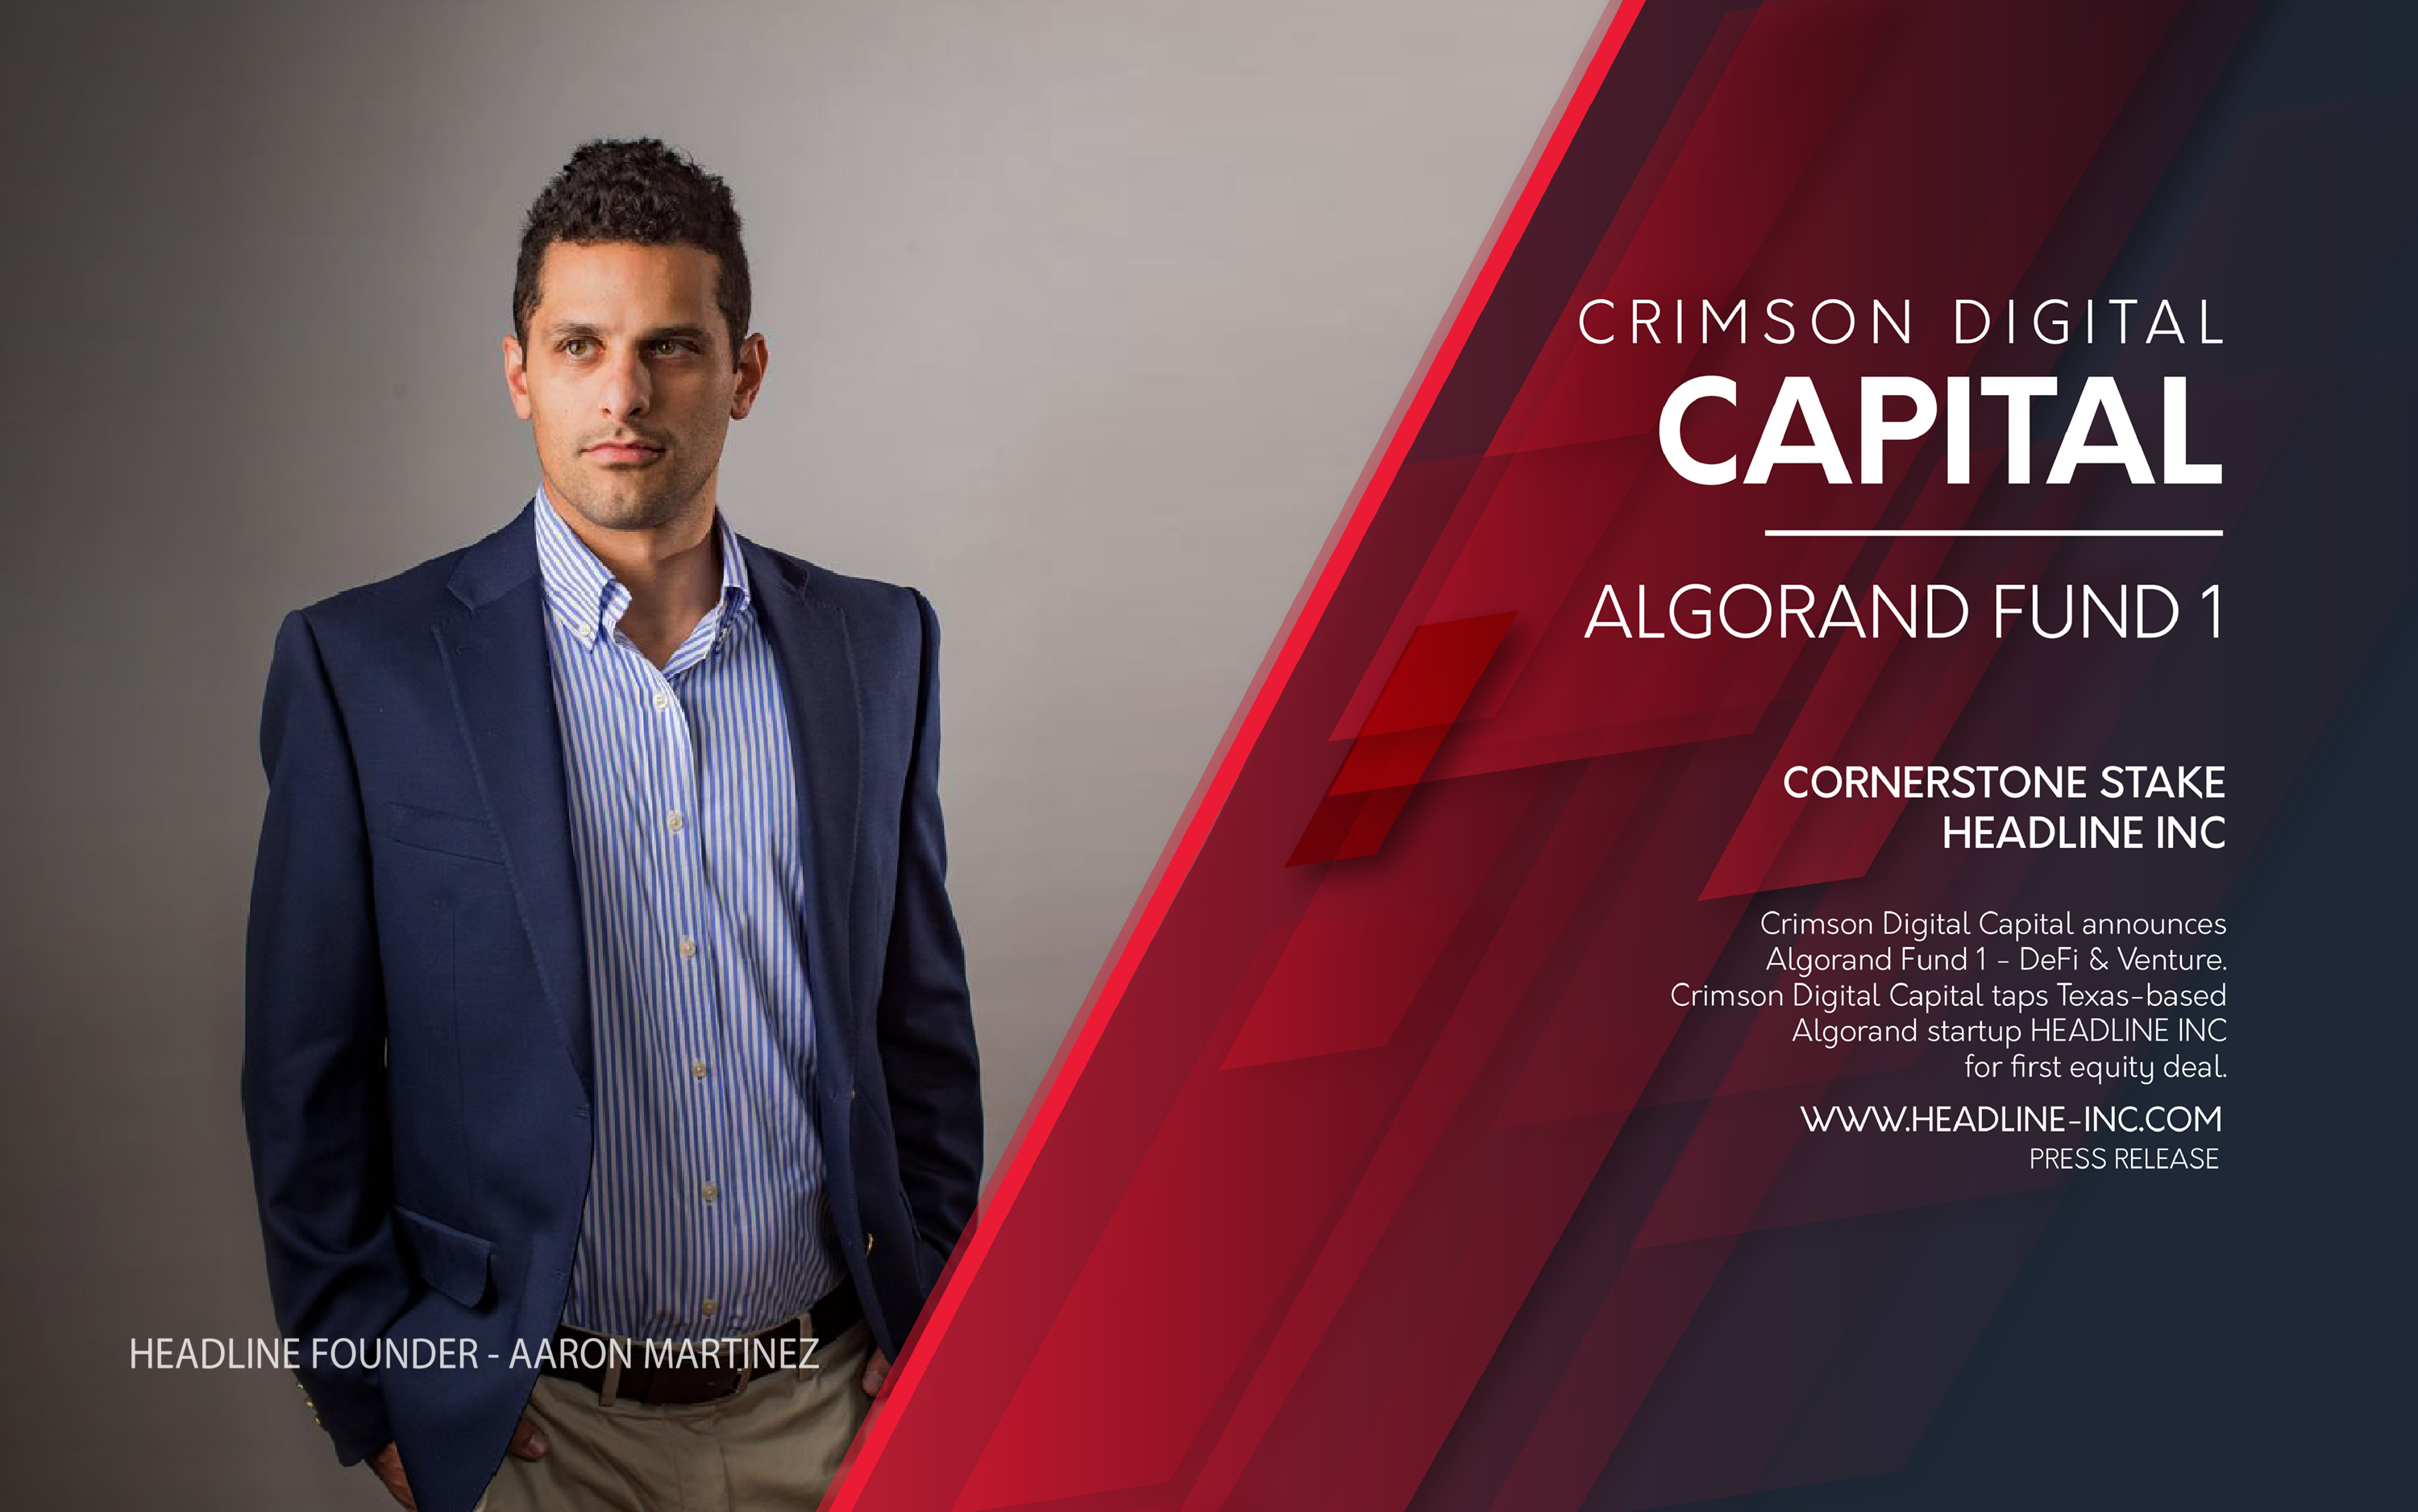 Crimson Digital Capital Launches Algorand Fund, Taps HEADLINE INC for First Equity Deal